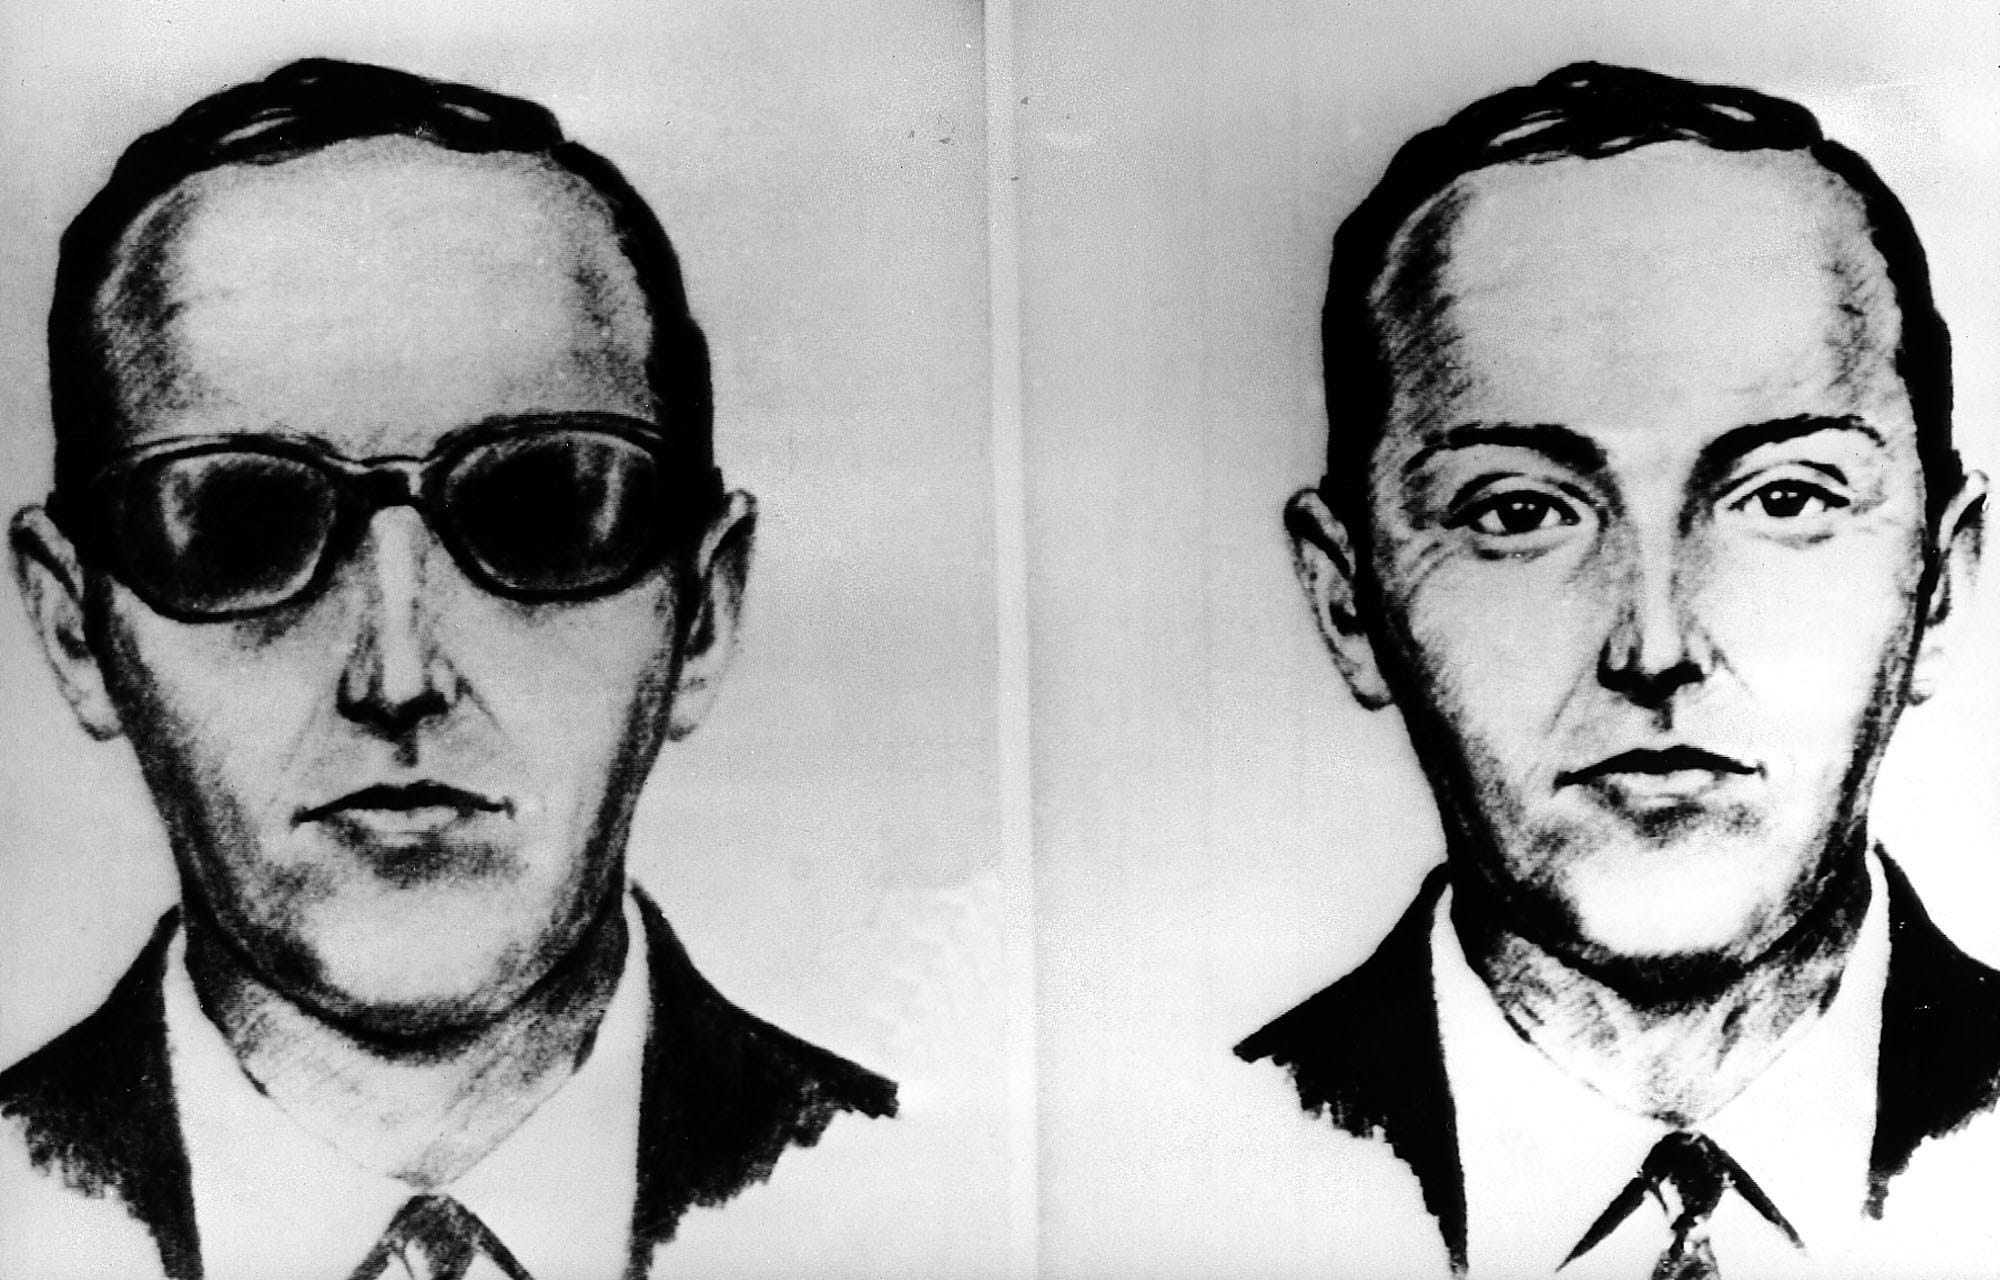 D.B. Cooper: New wrinkles in the tale of a mystery skyjacker who leaped from a jet with $200,000